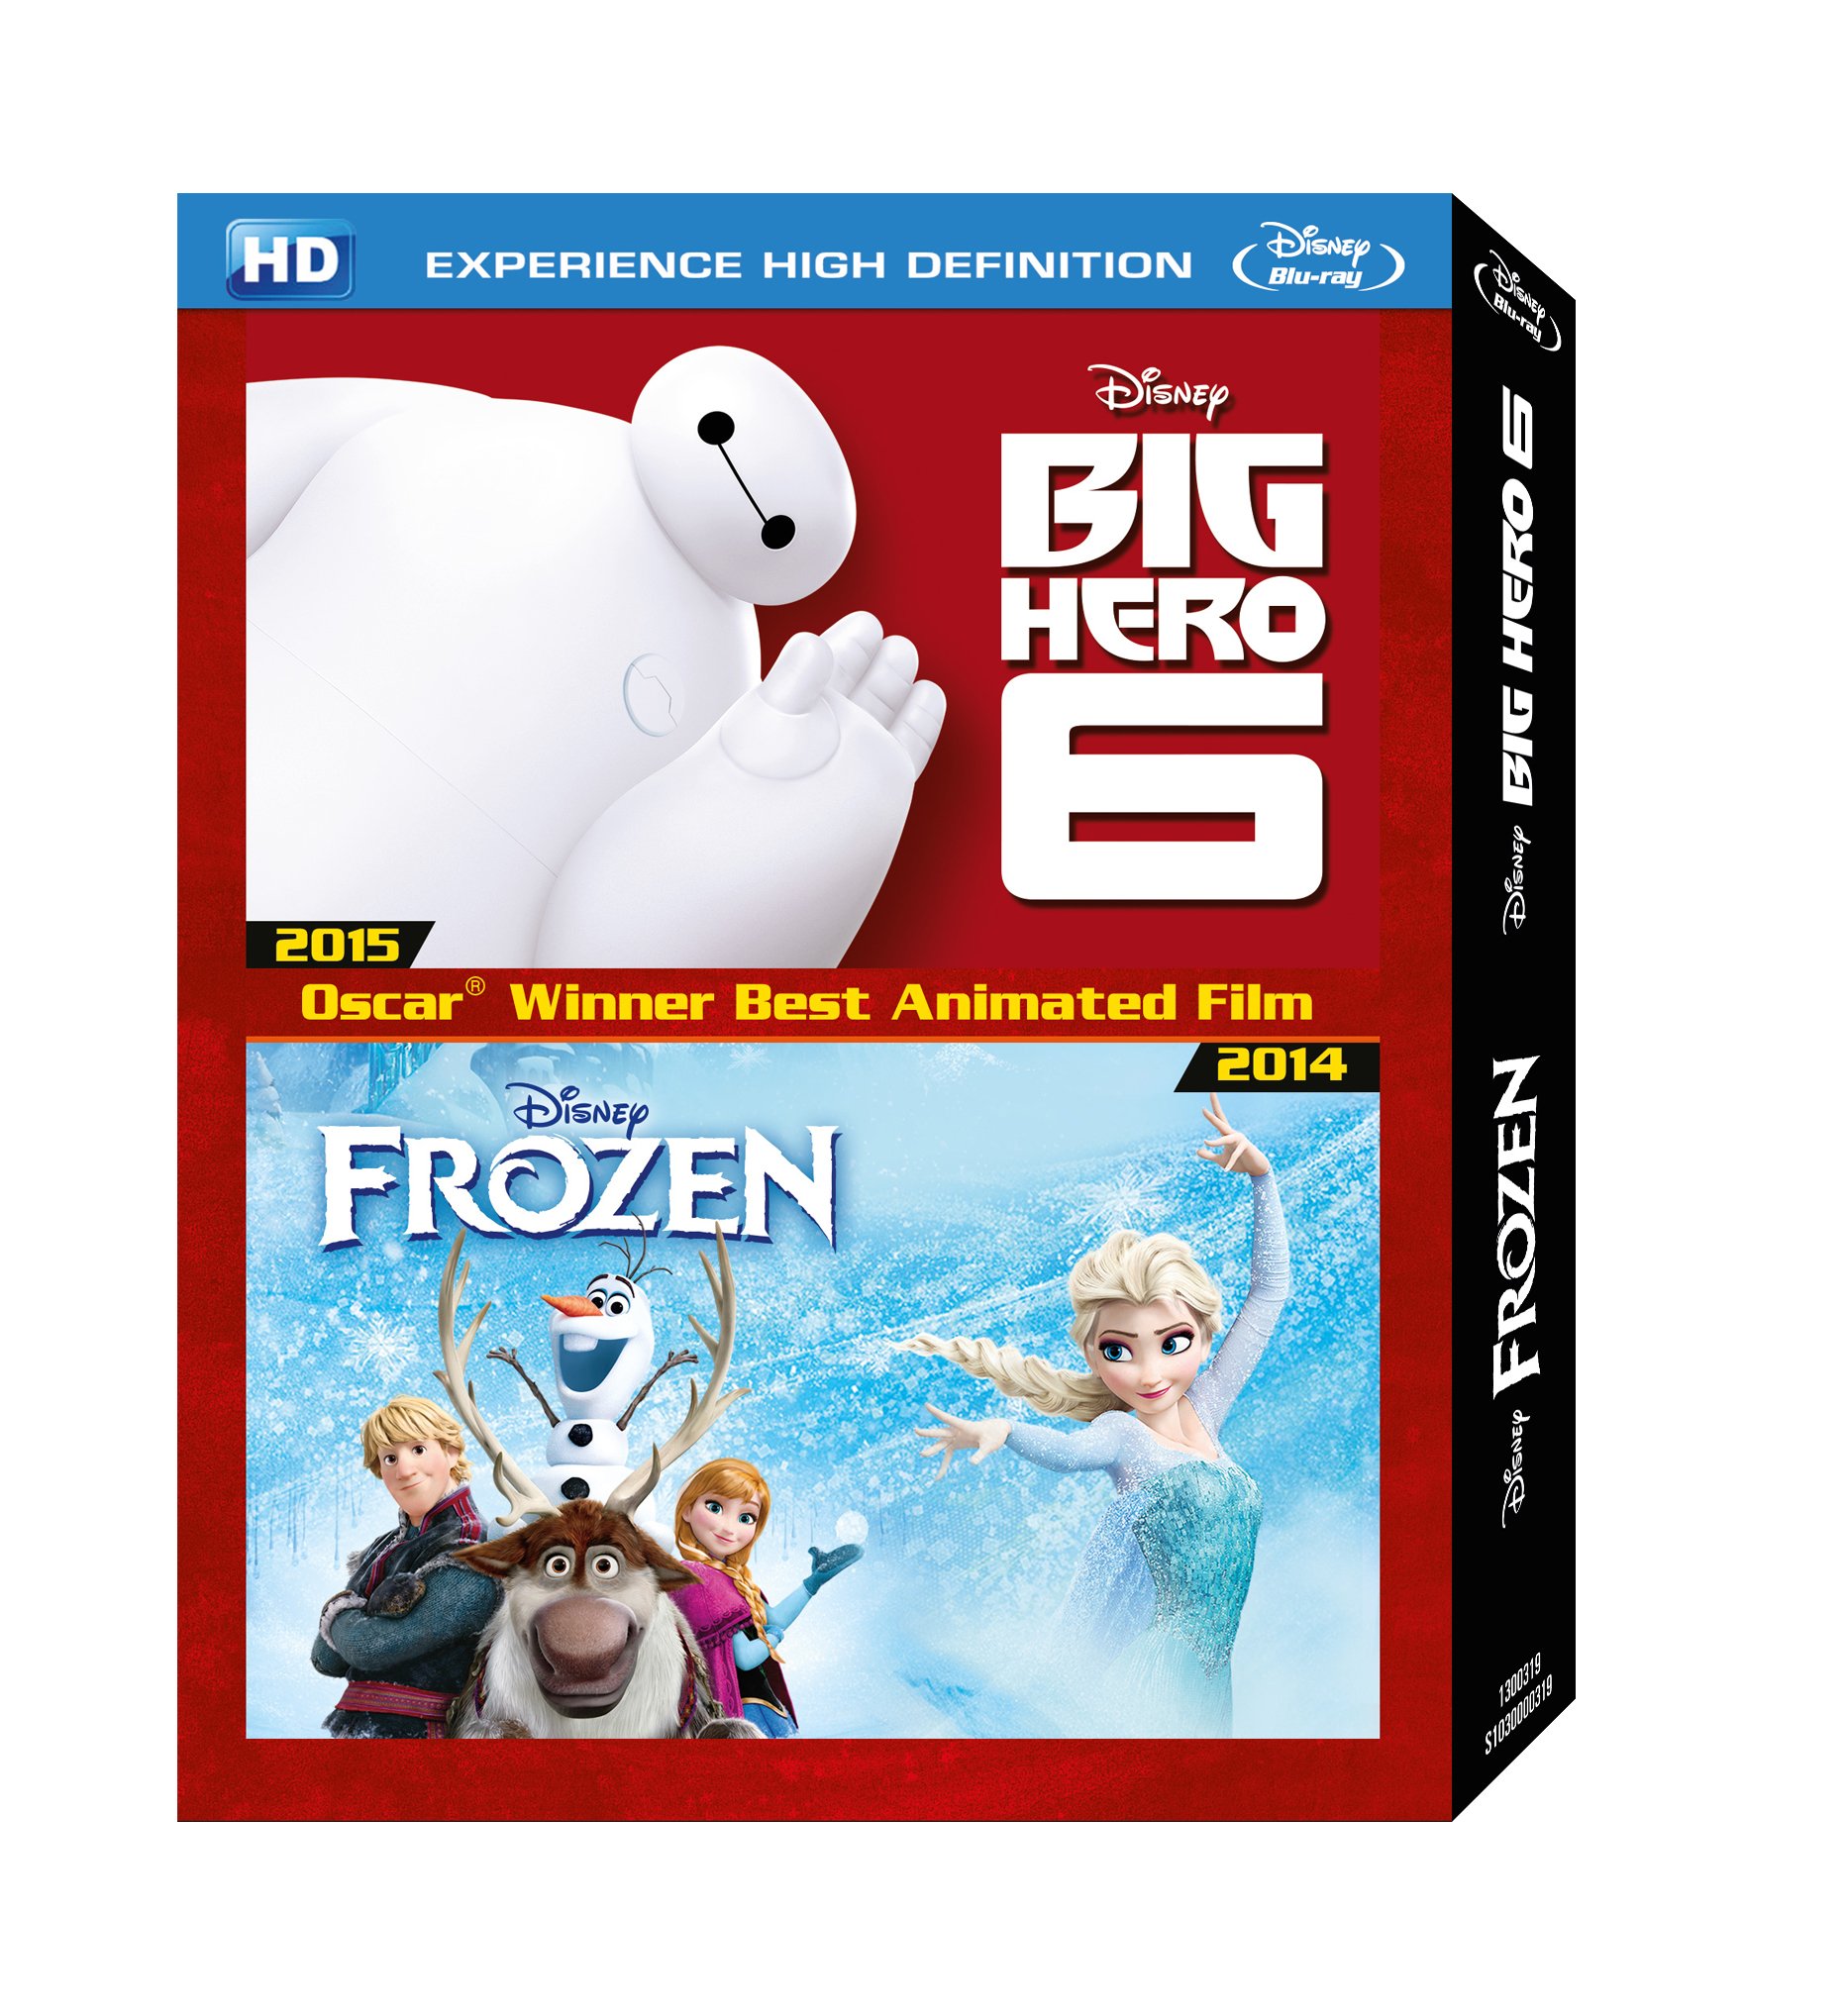 big-hero-6-and-frozen-movie-purchase-or-watch-online